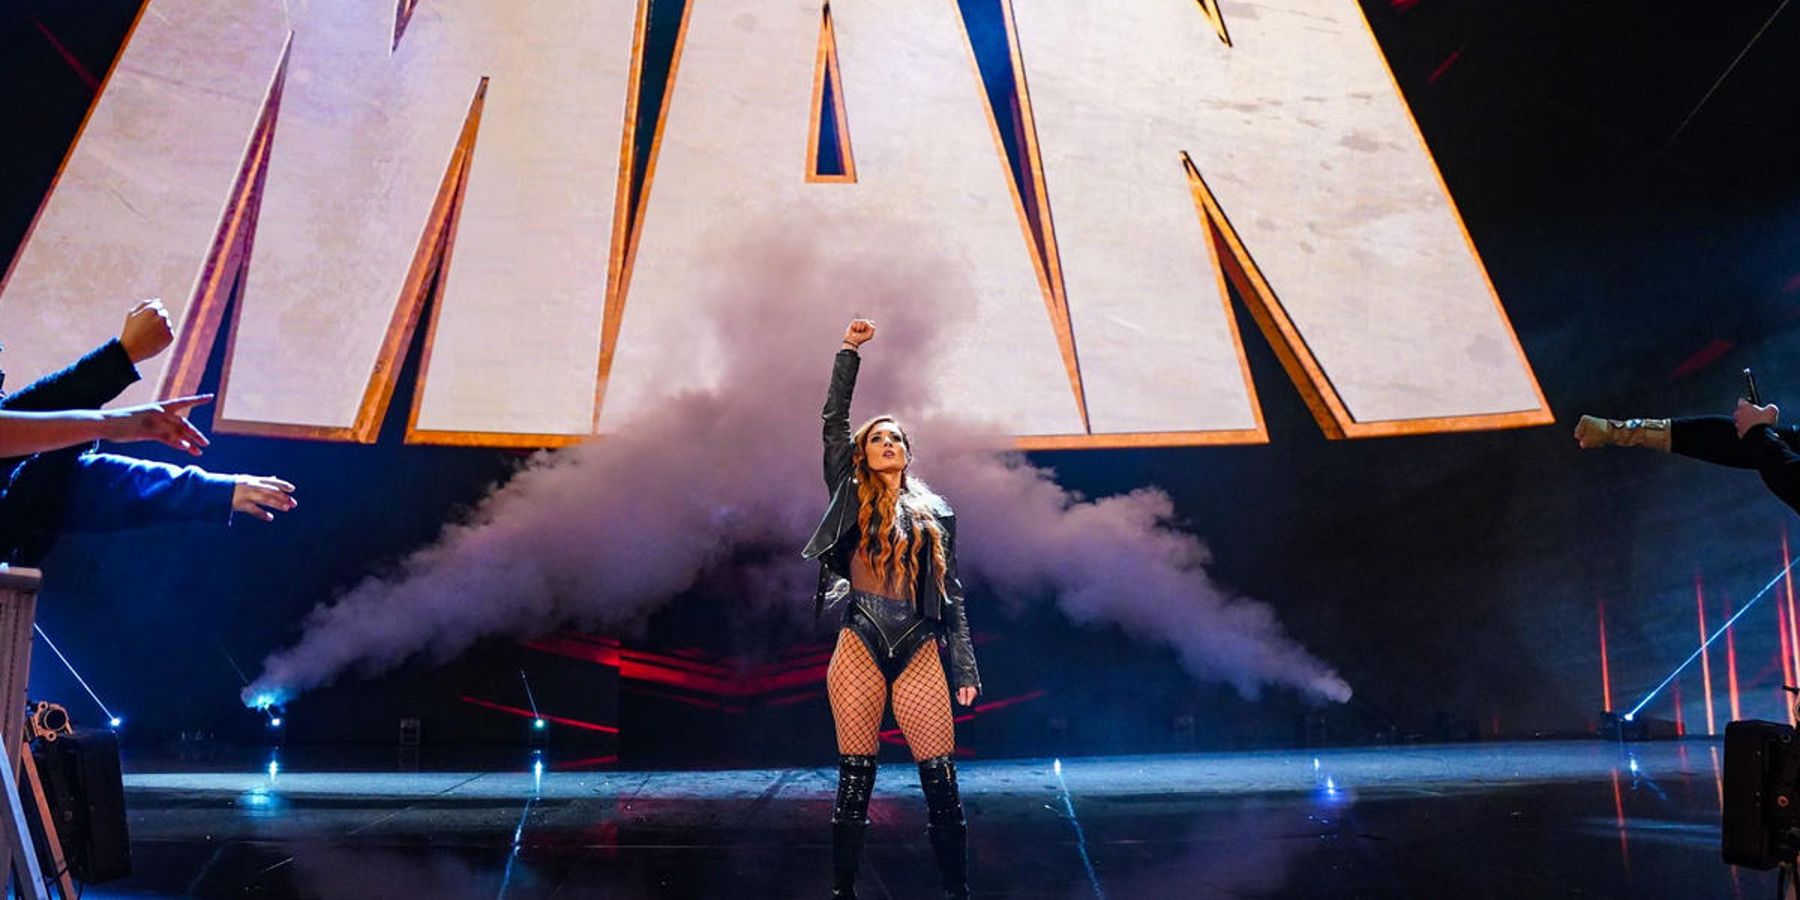 Becky Lynch makes her entrance during WWE's Raw is 30 show, before having her steel cage match against Bayley cut short.